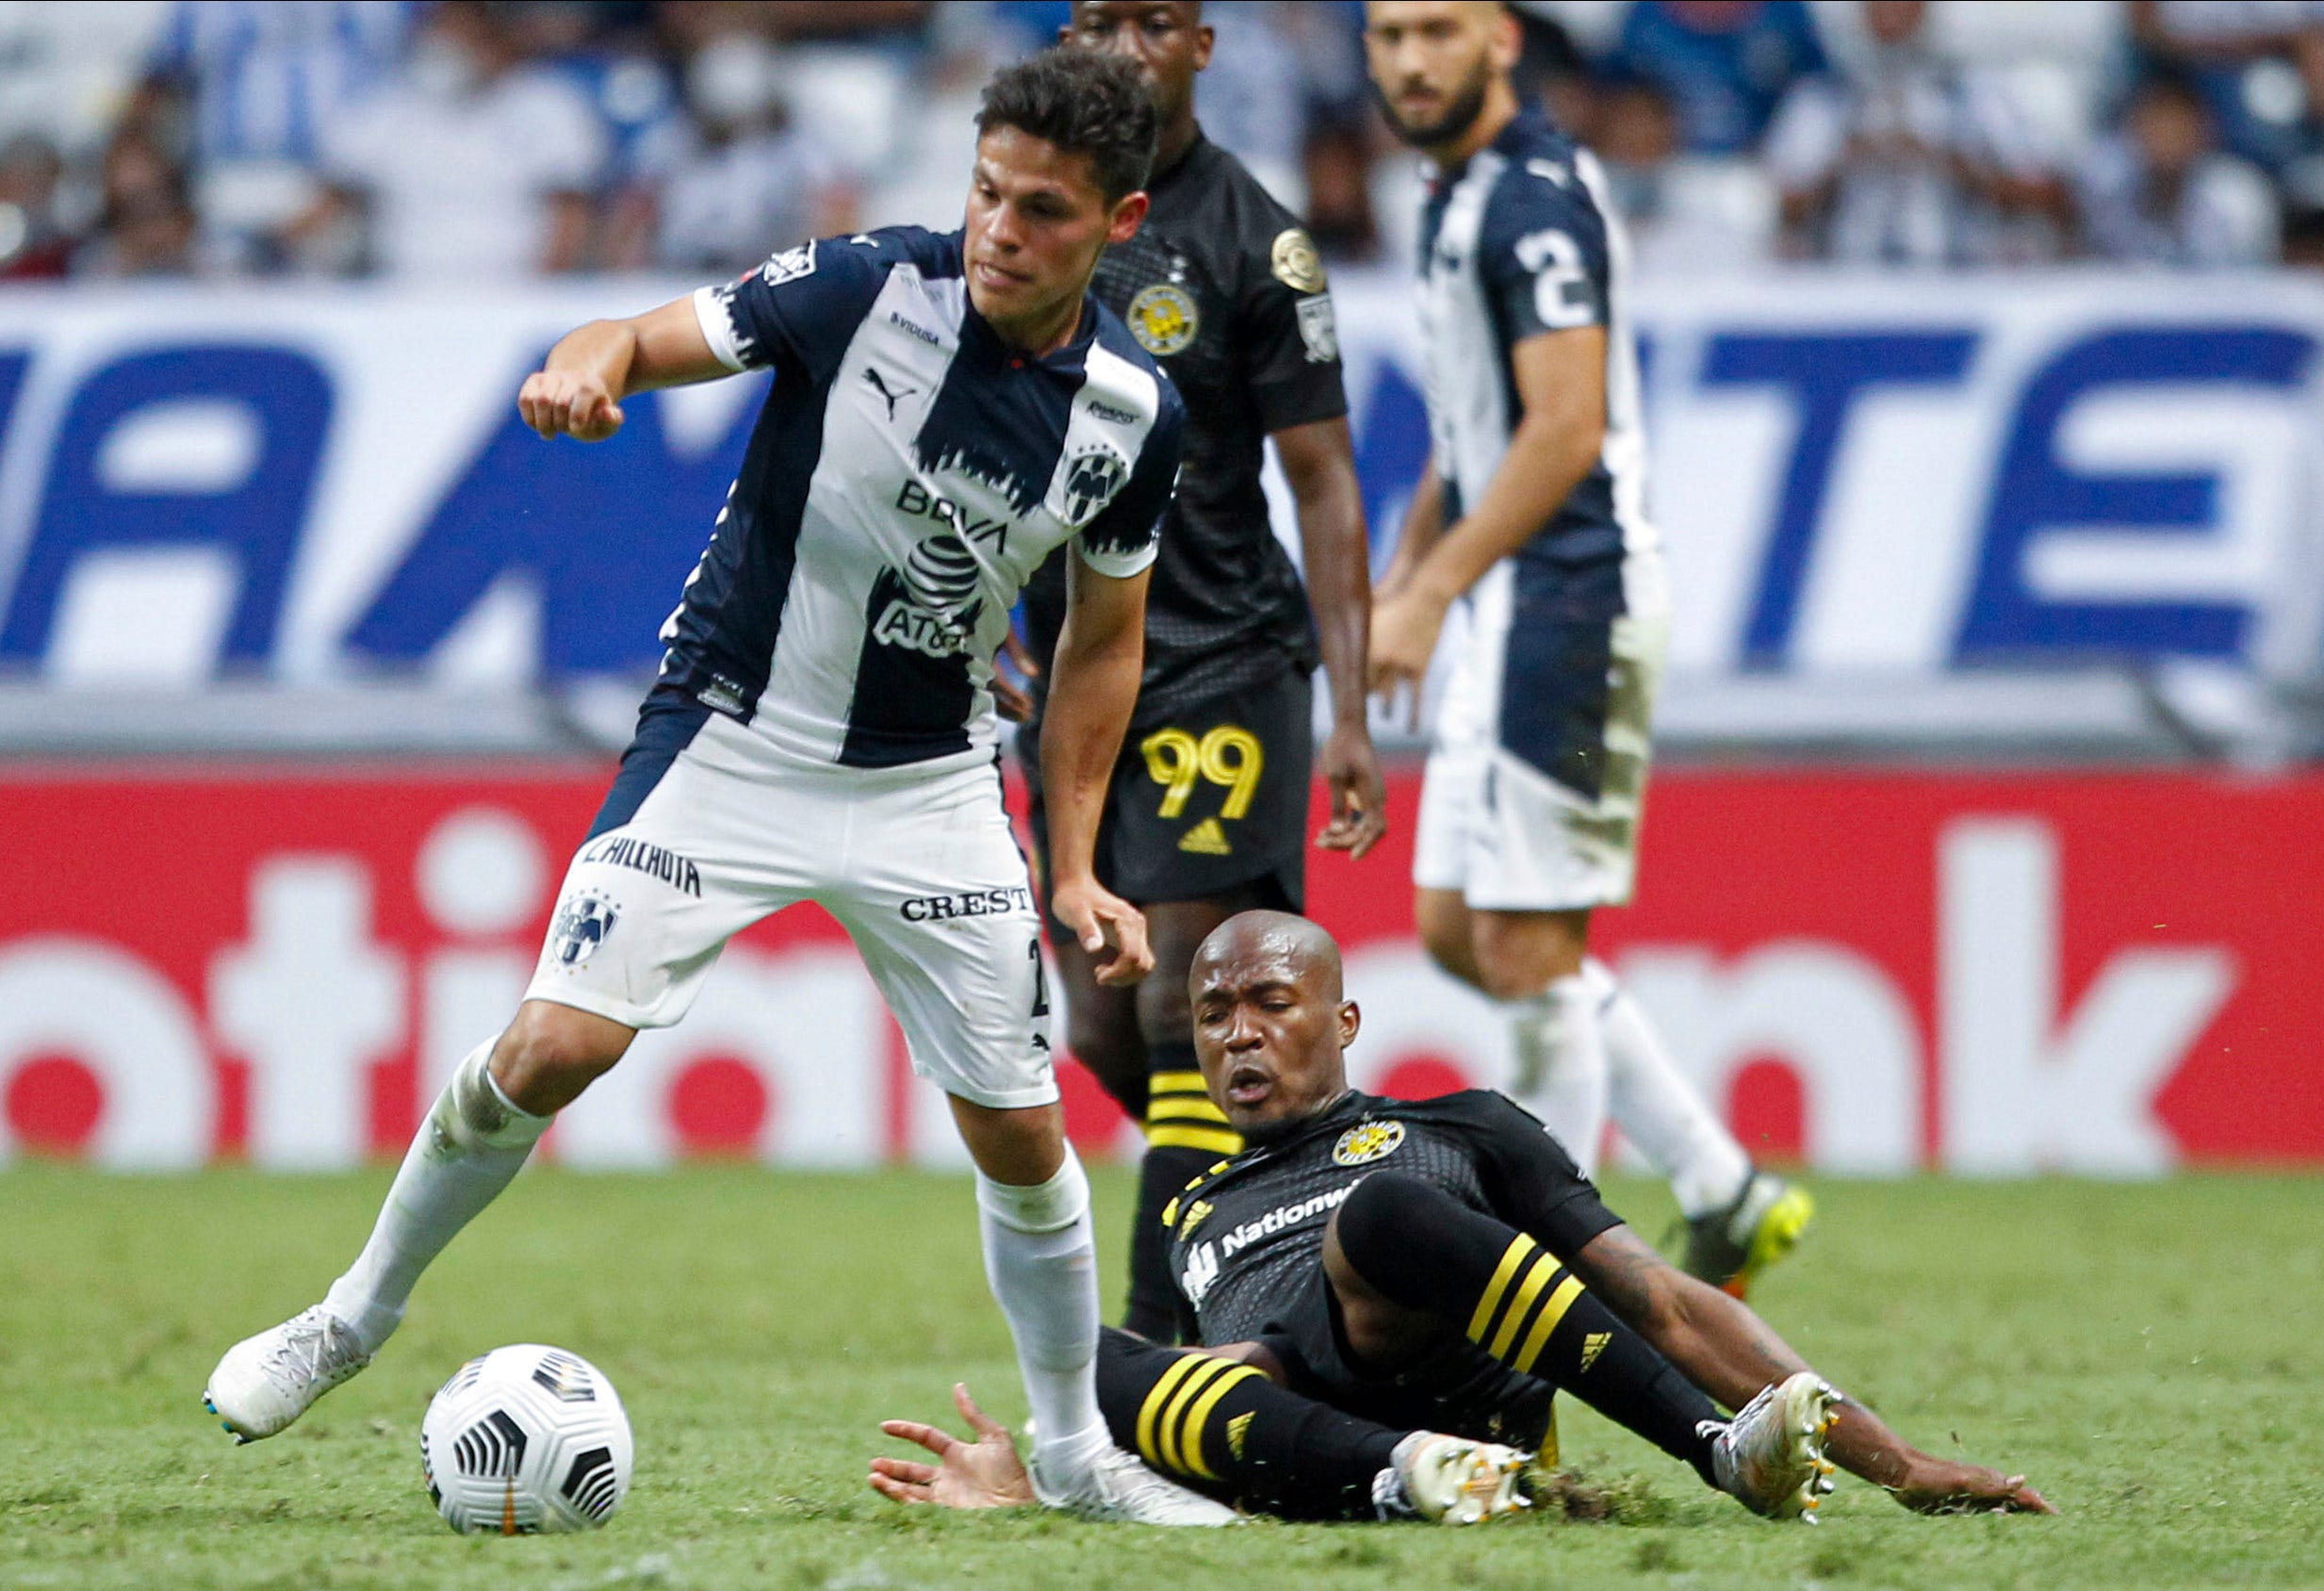 What The Crew S Loss To Monterrey Says About Gap Between Mls Liga Mx